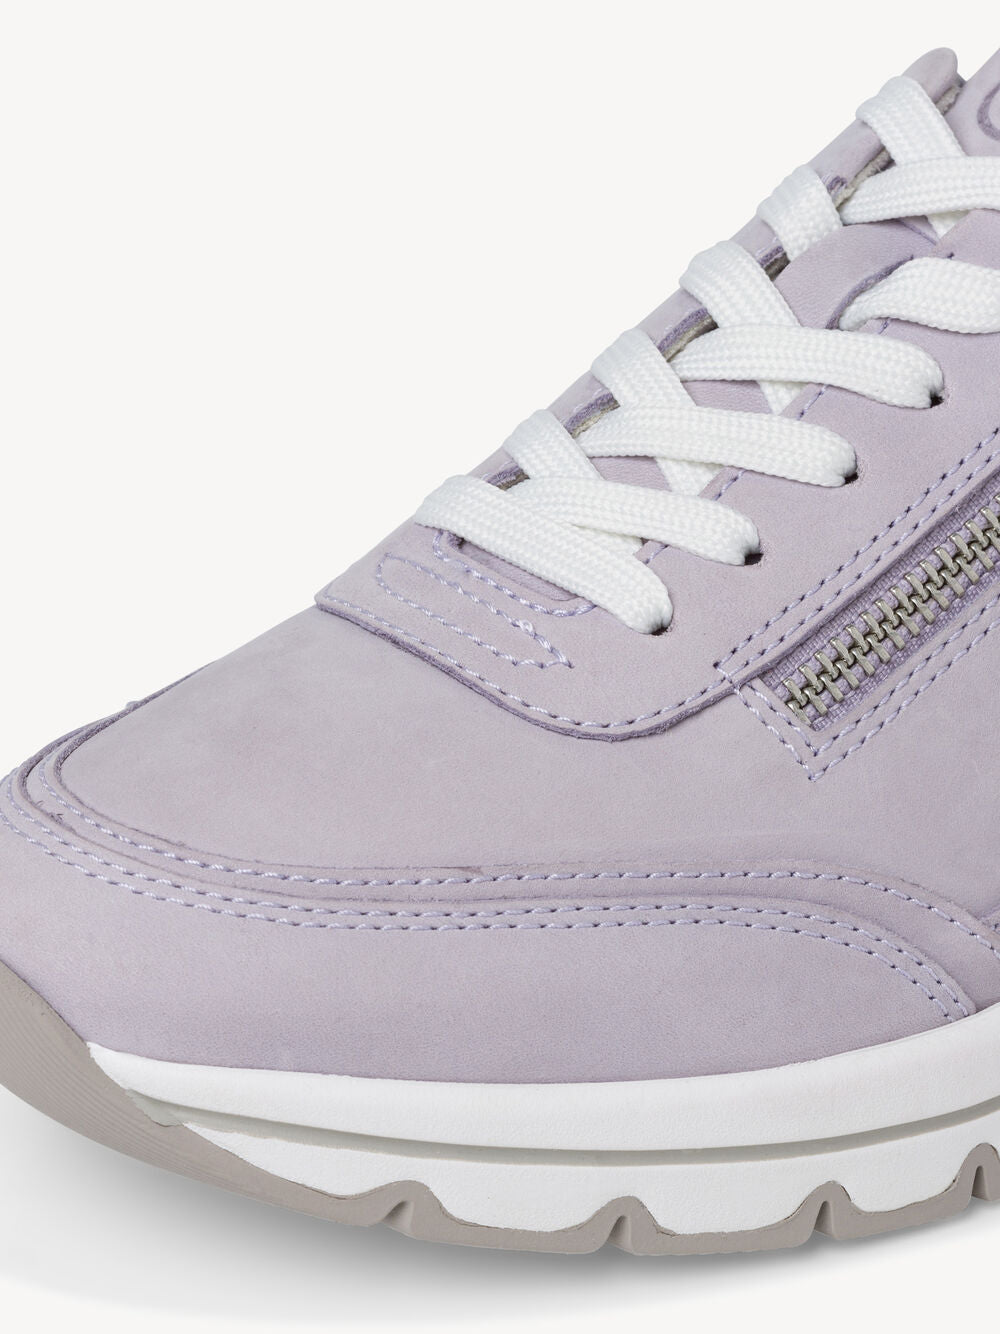 Tamaris pure relax lilac trainer 23725